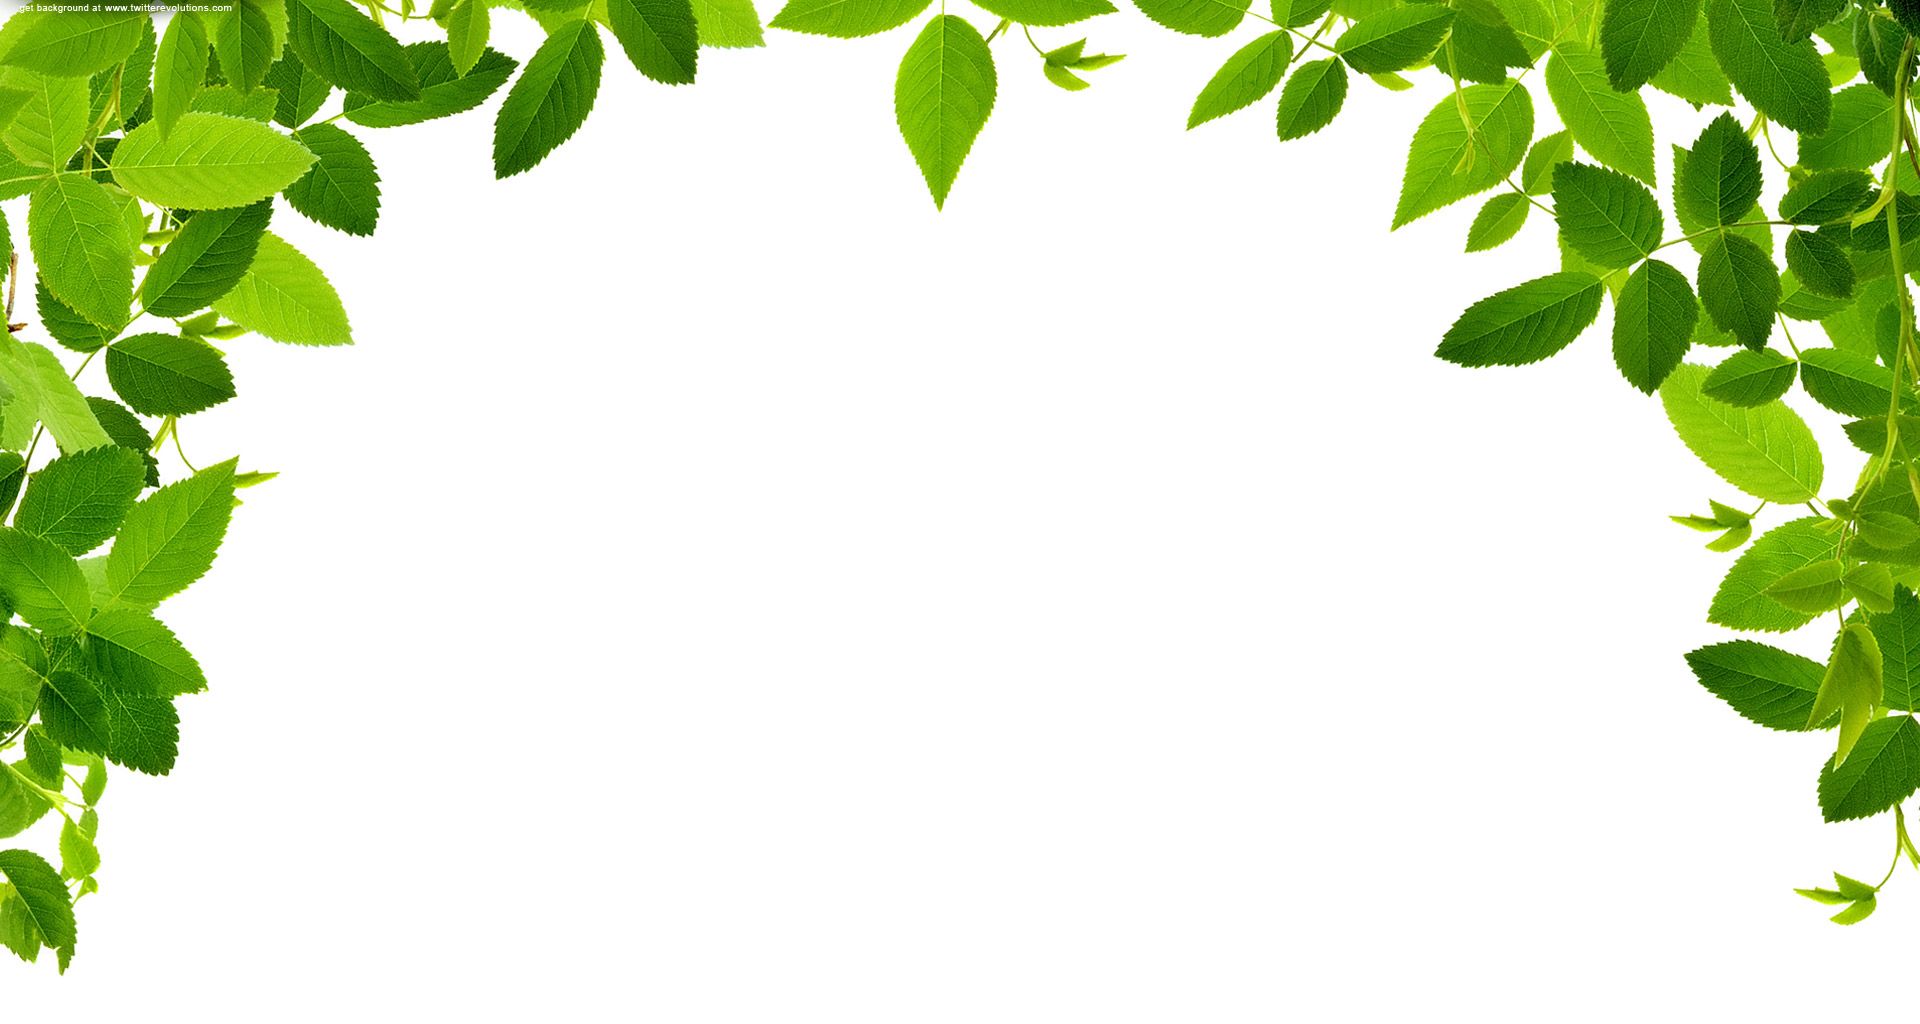 Leaves Real Free Images At Clker Com Vector Clip Art Online.